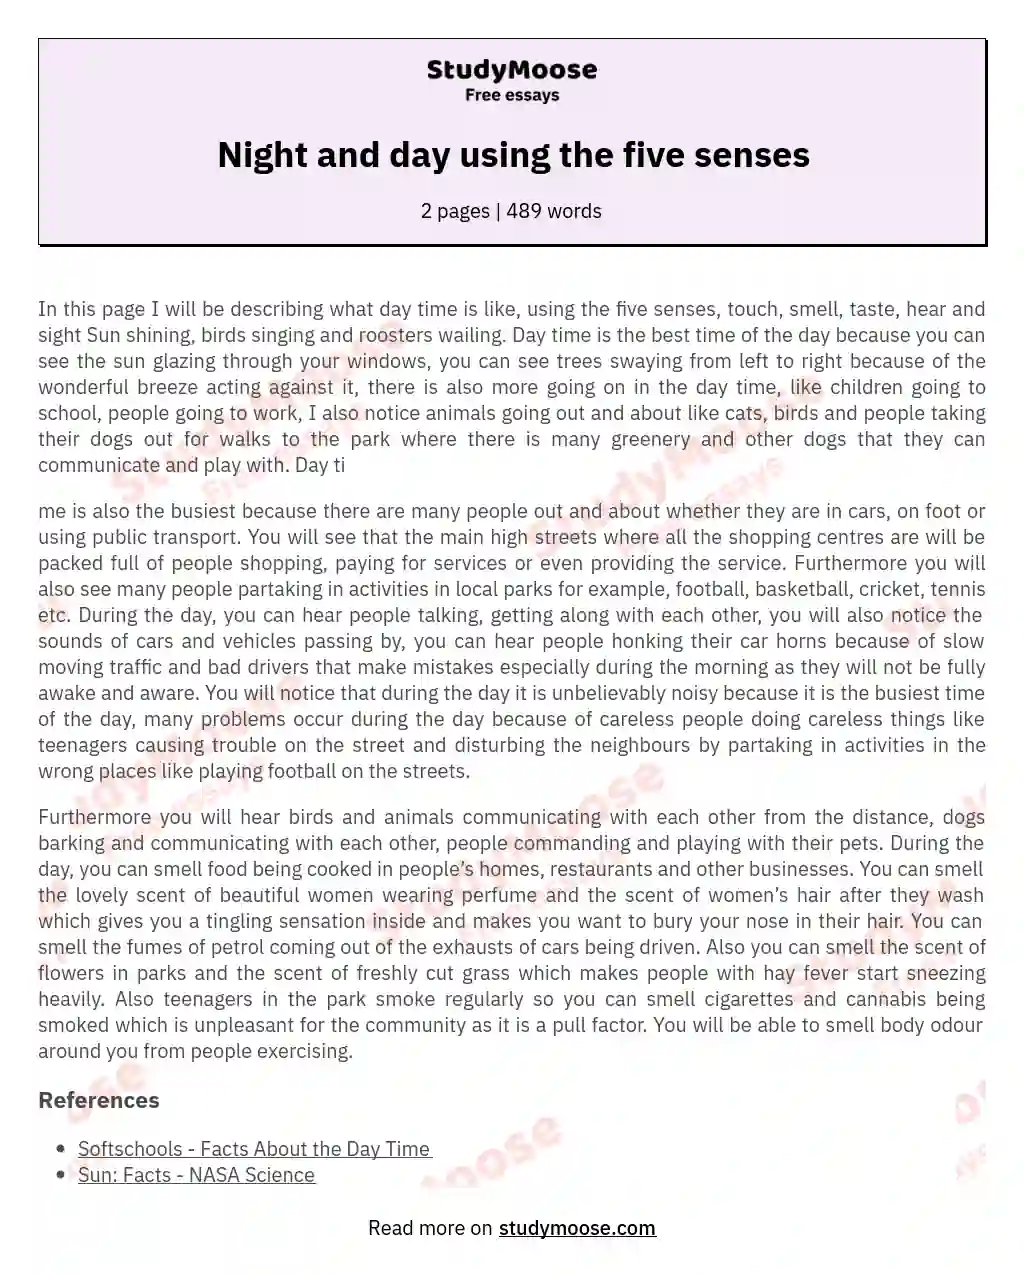 Night and day using the five senses